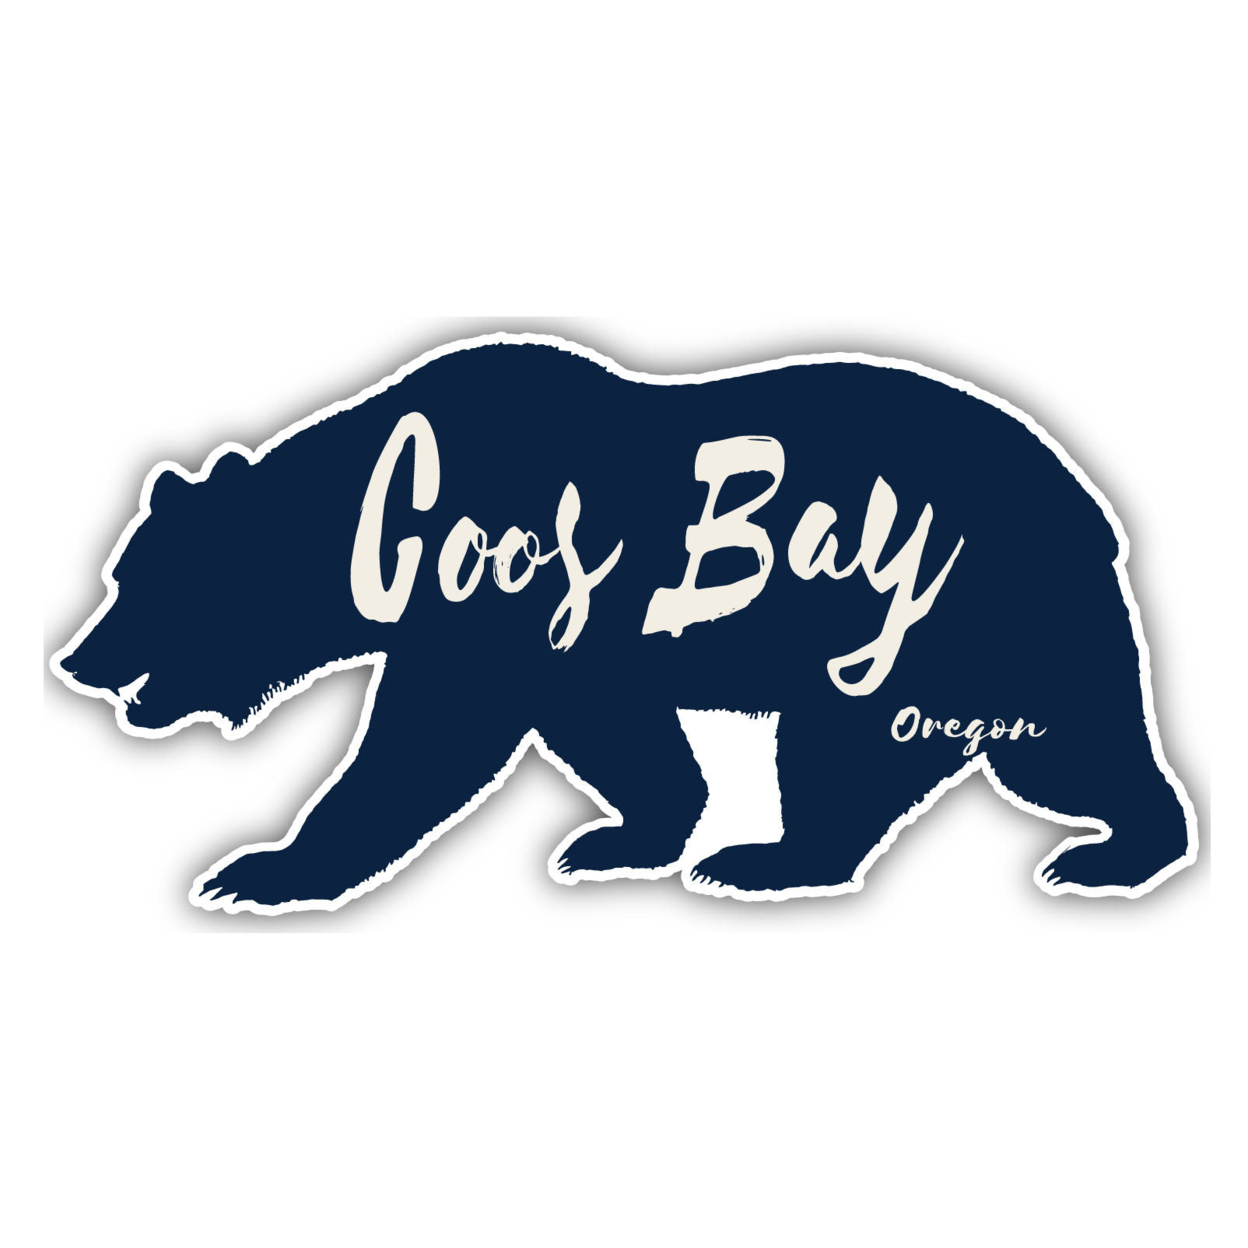 Coos Bay Oregon Souvenir Decorative Stickers (Choose Theme And Size) - 4-Pack, 2-Inch, Camp Life